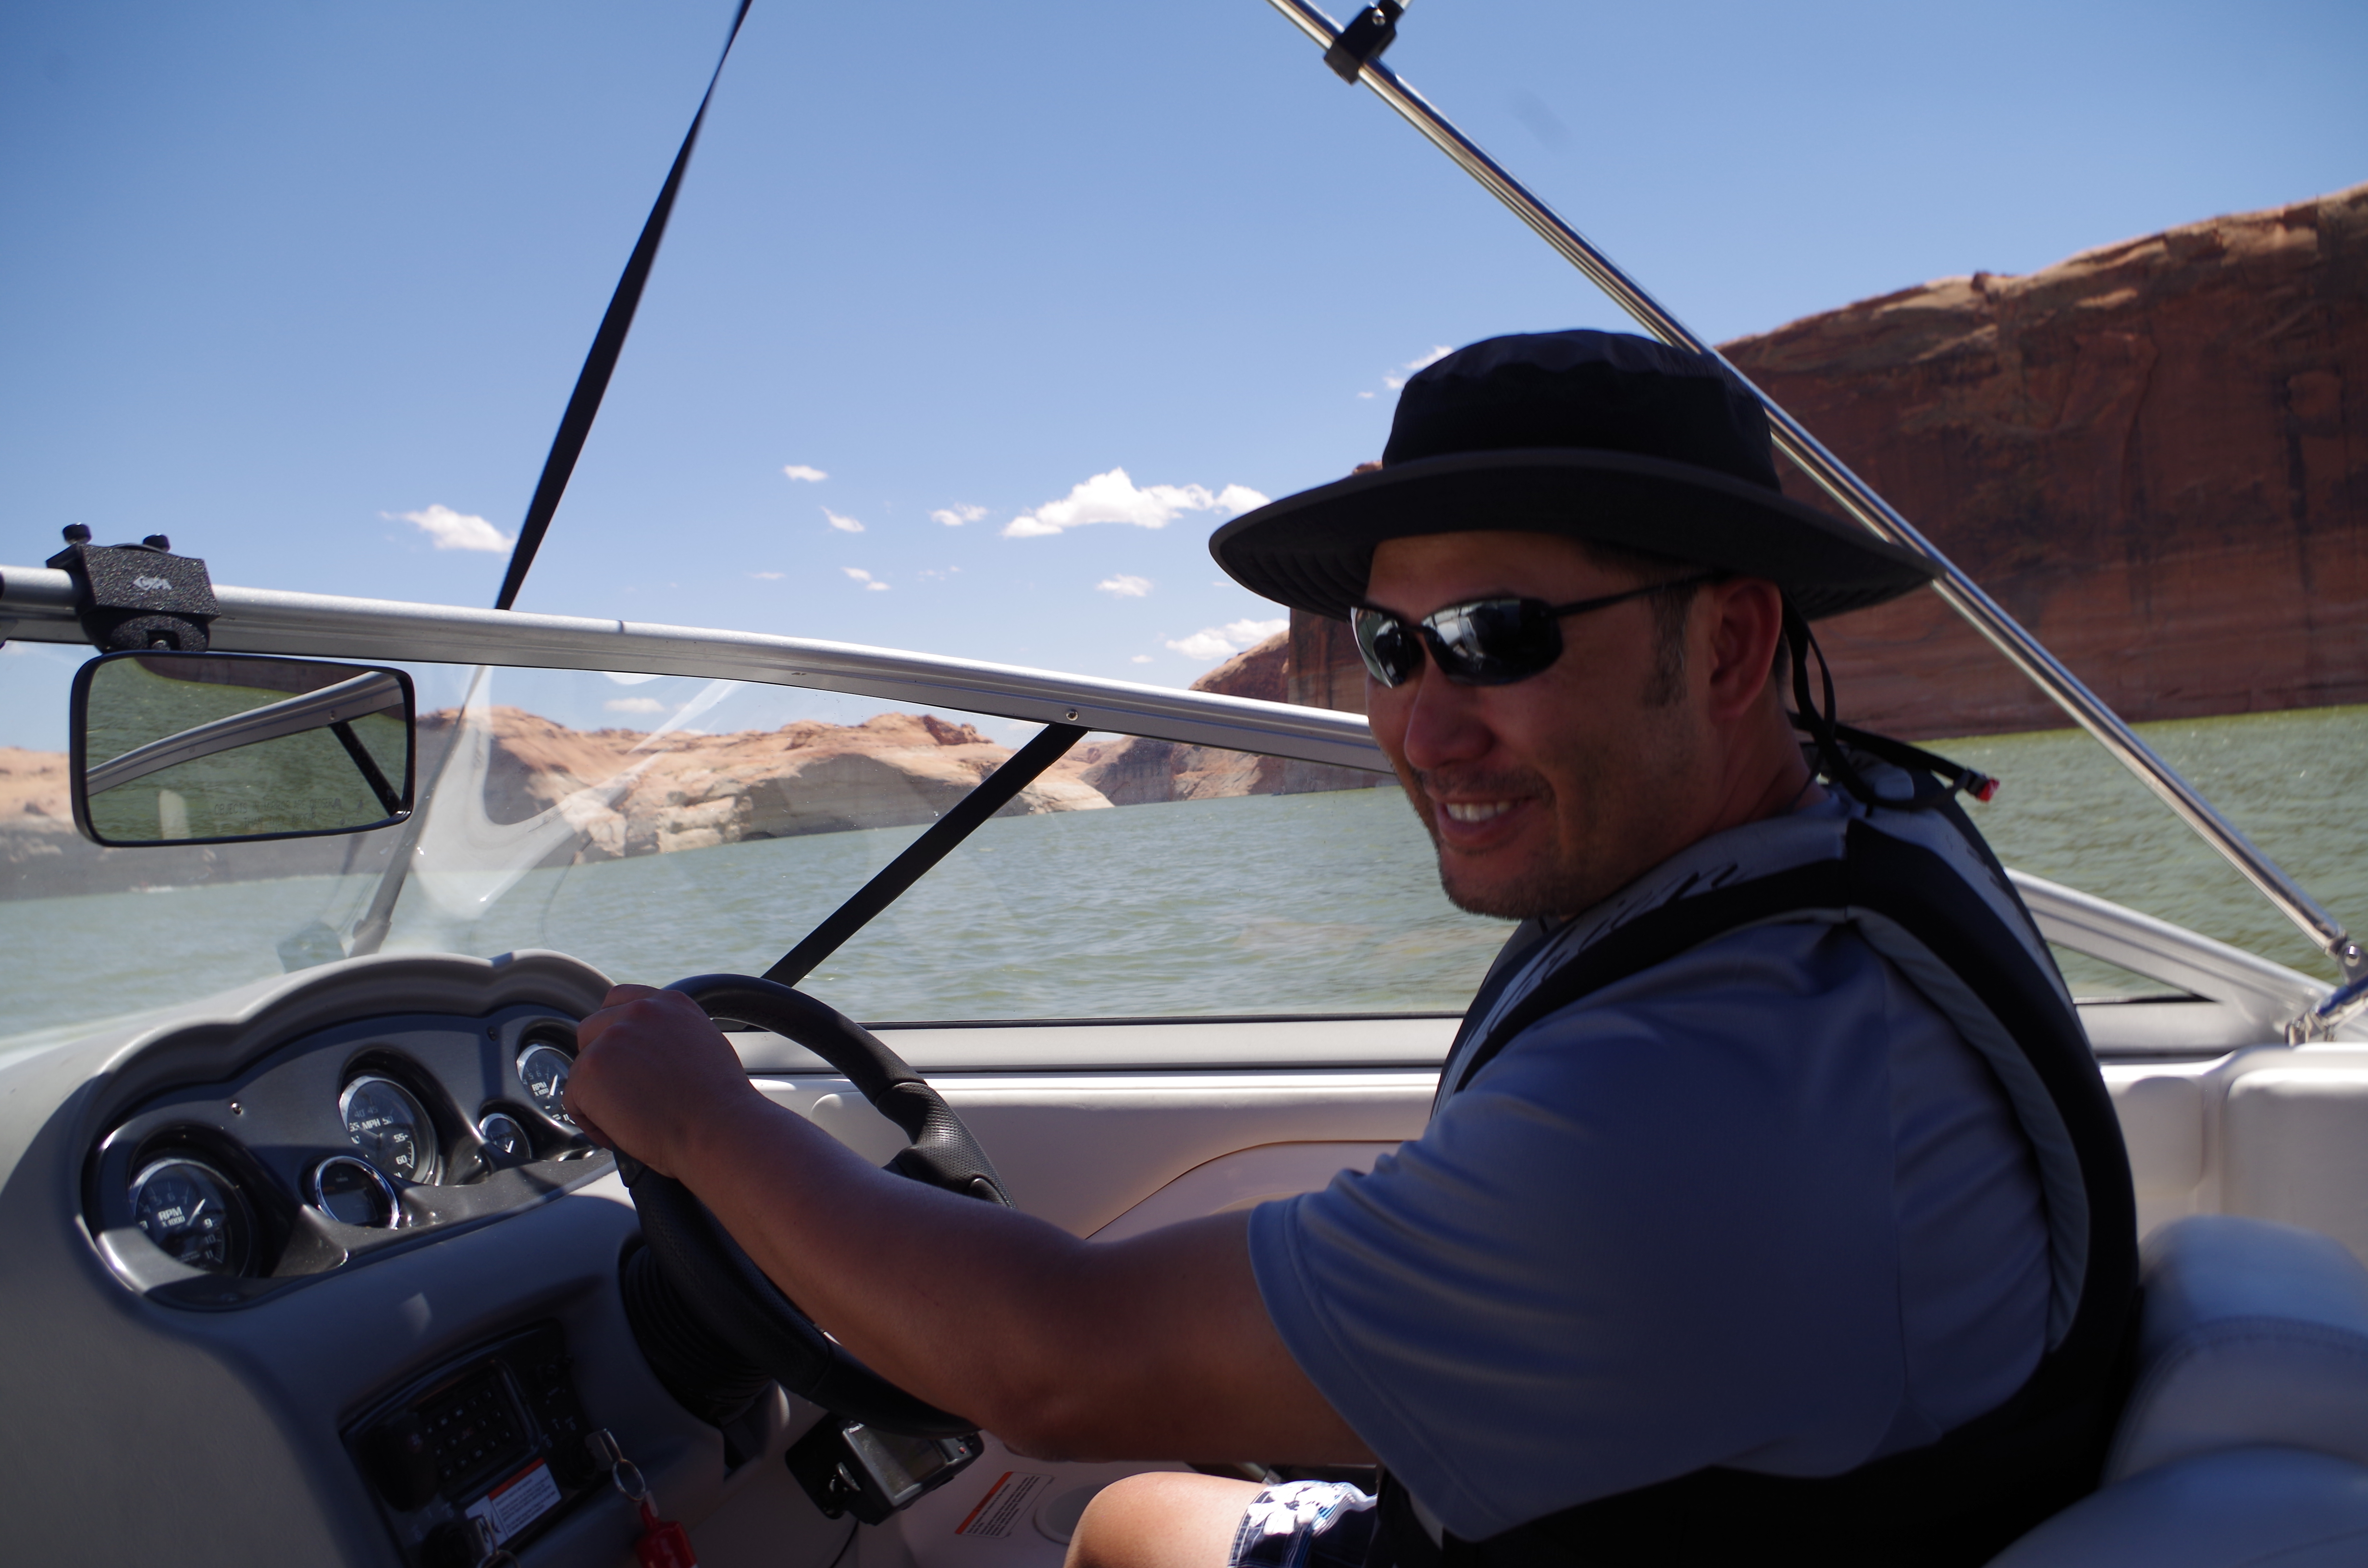 Mark driving a boat for the first time